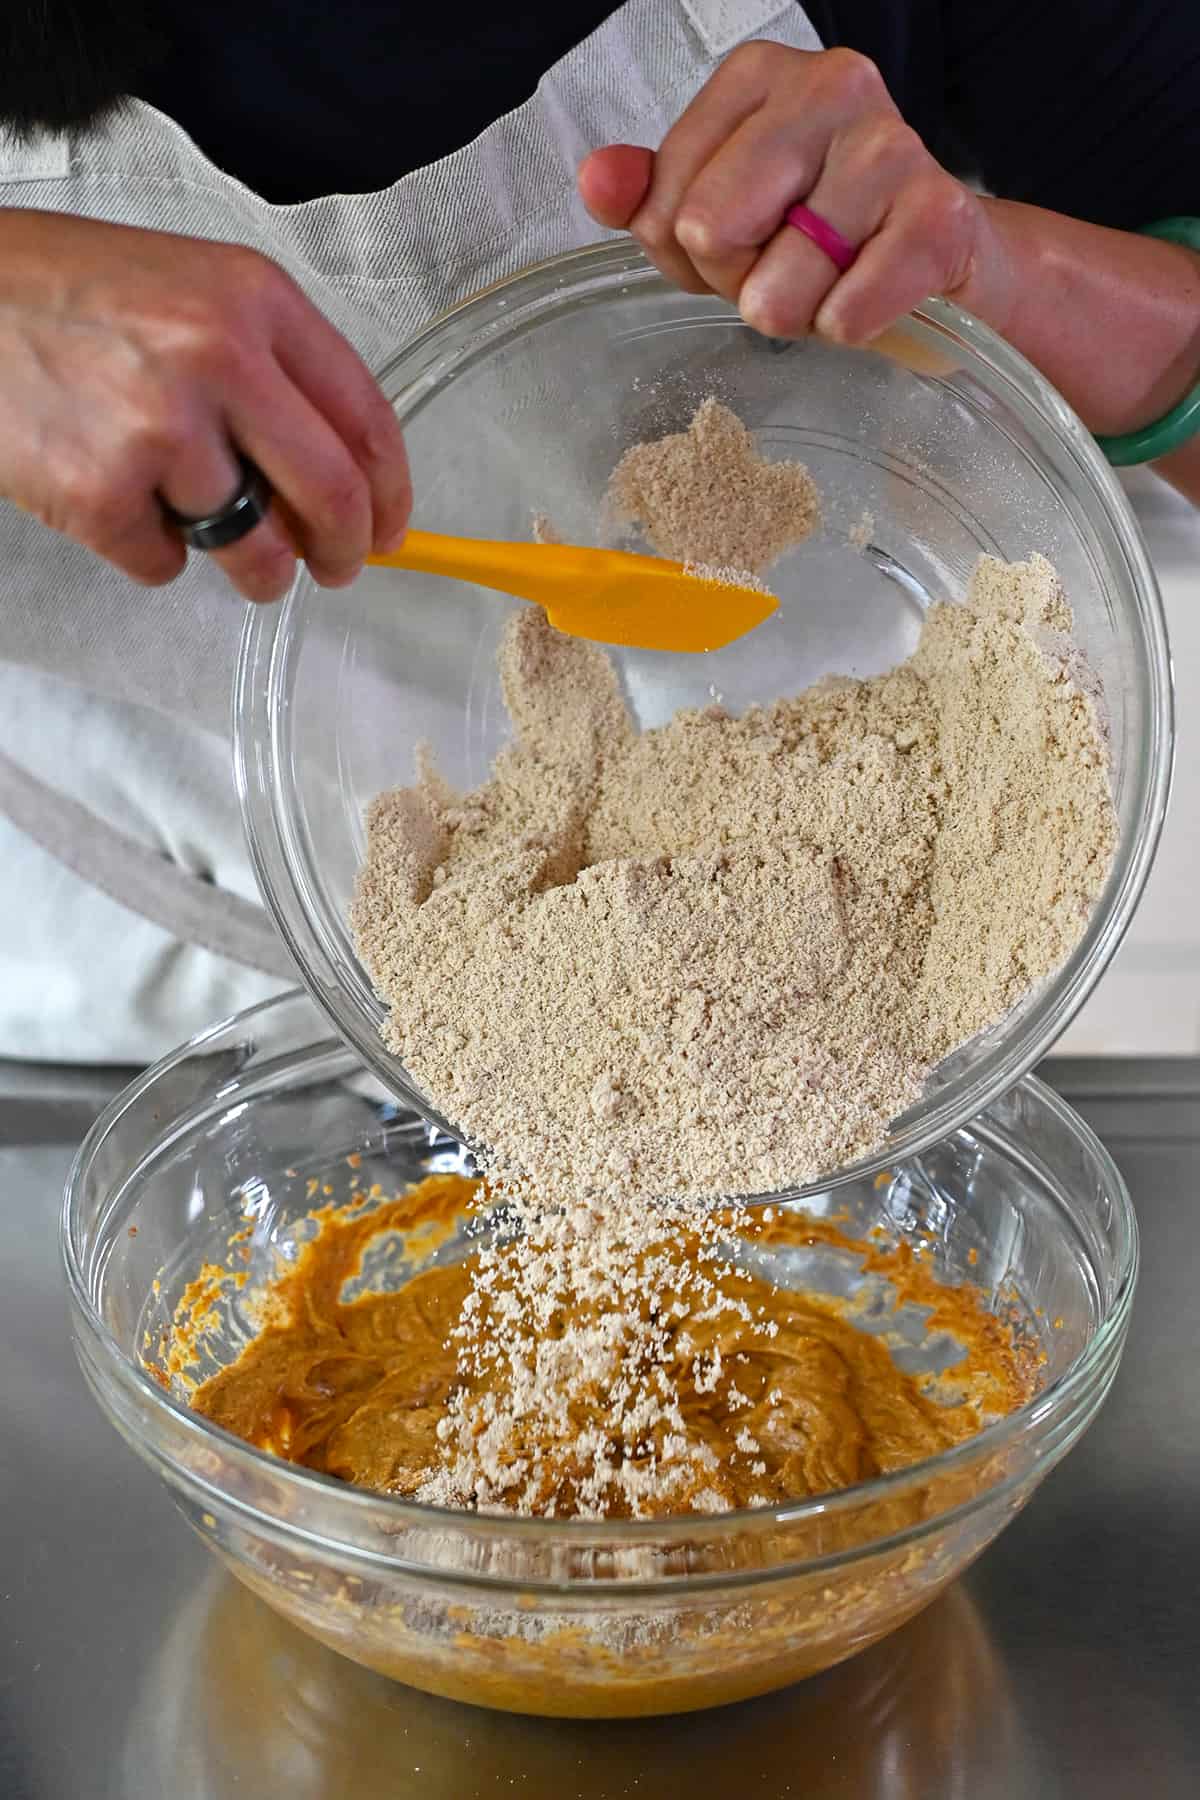 Adding the almond flour mixture to the bowl of wet ingredients to make paleo and gluten free pumpkin cookies.